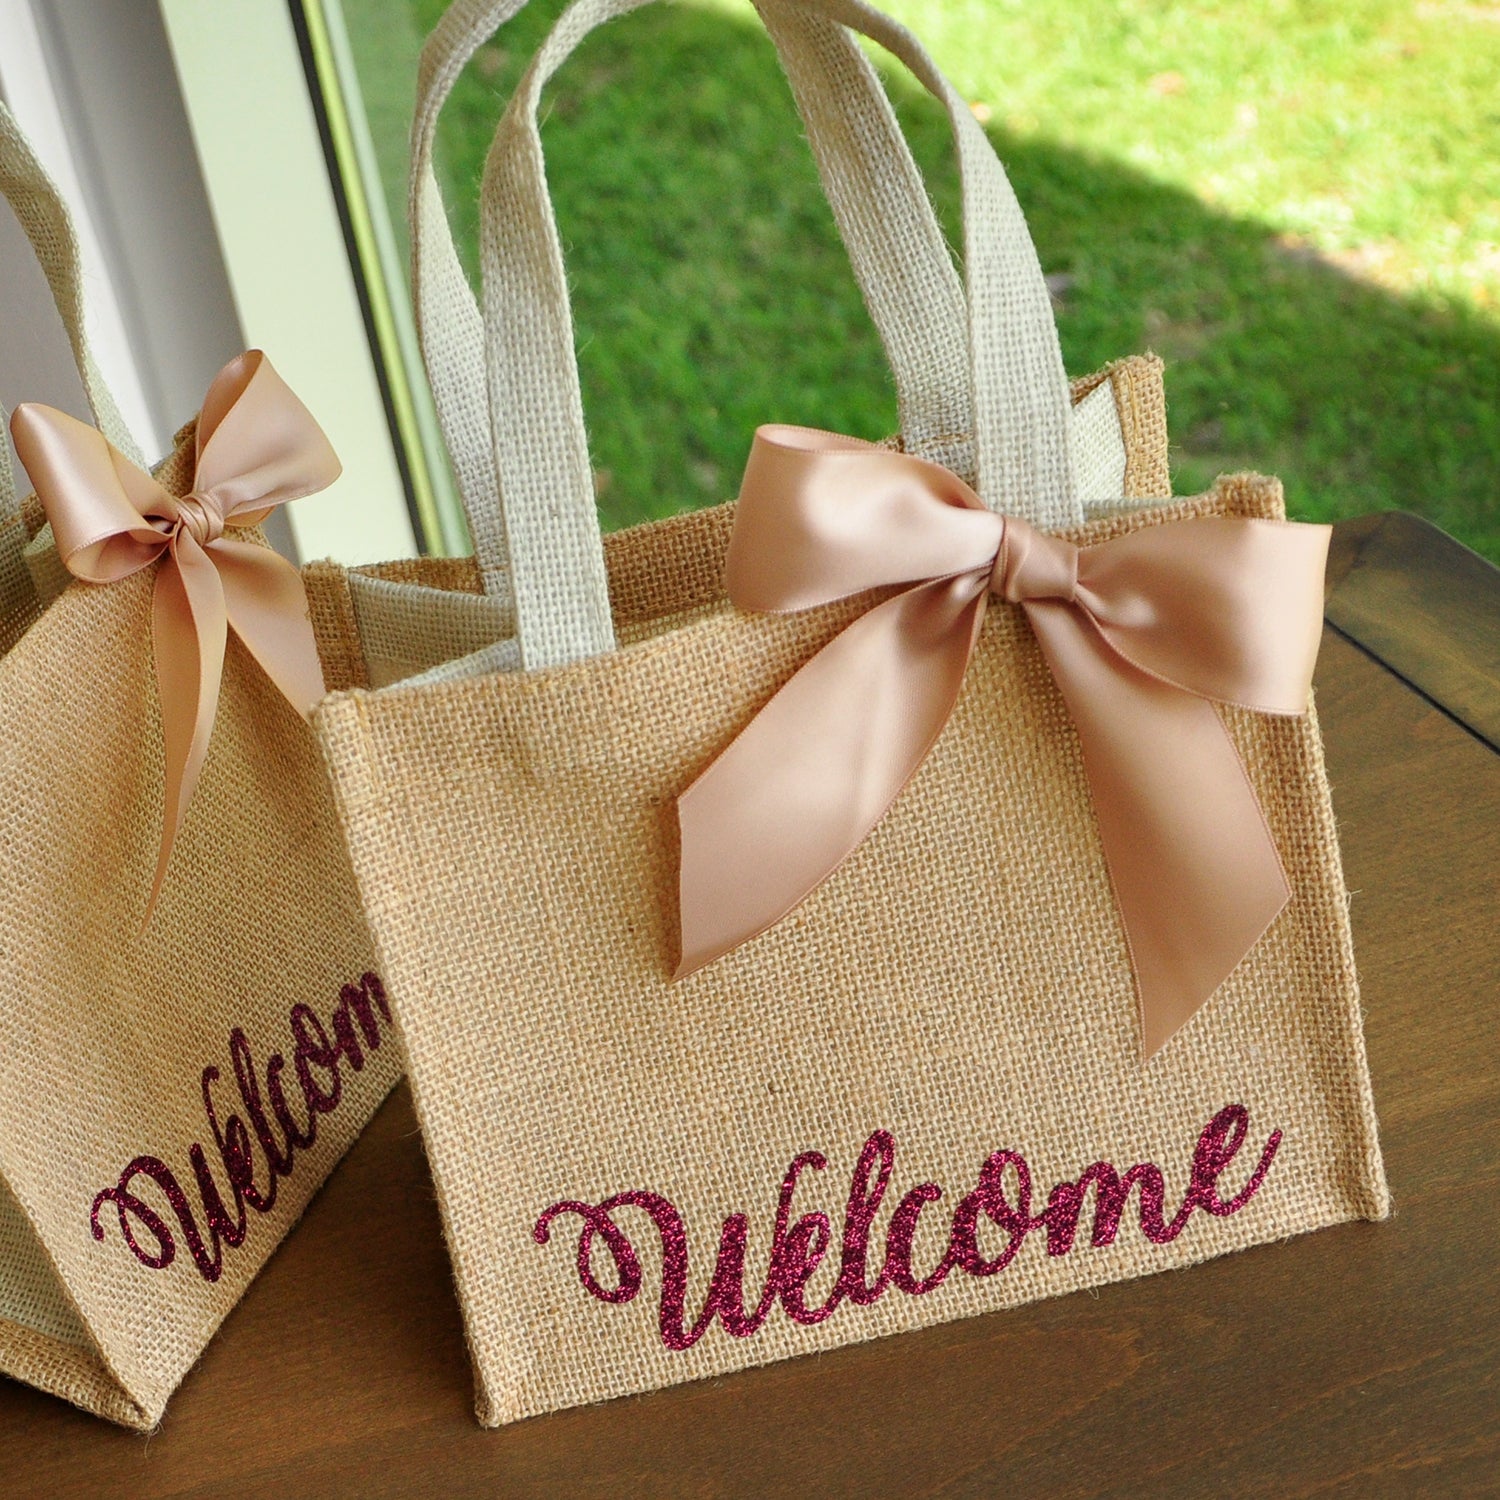 Unforgettable Goodie Bag Ideas for Every Occasion!